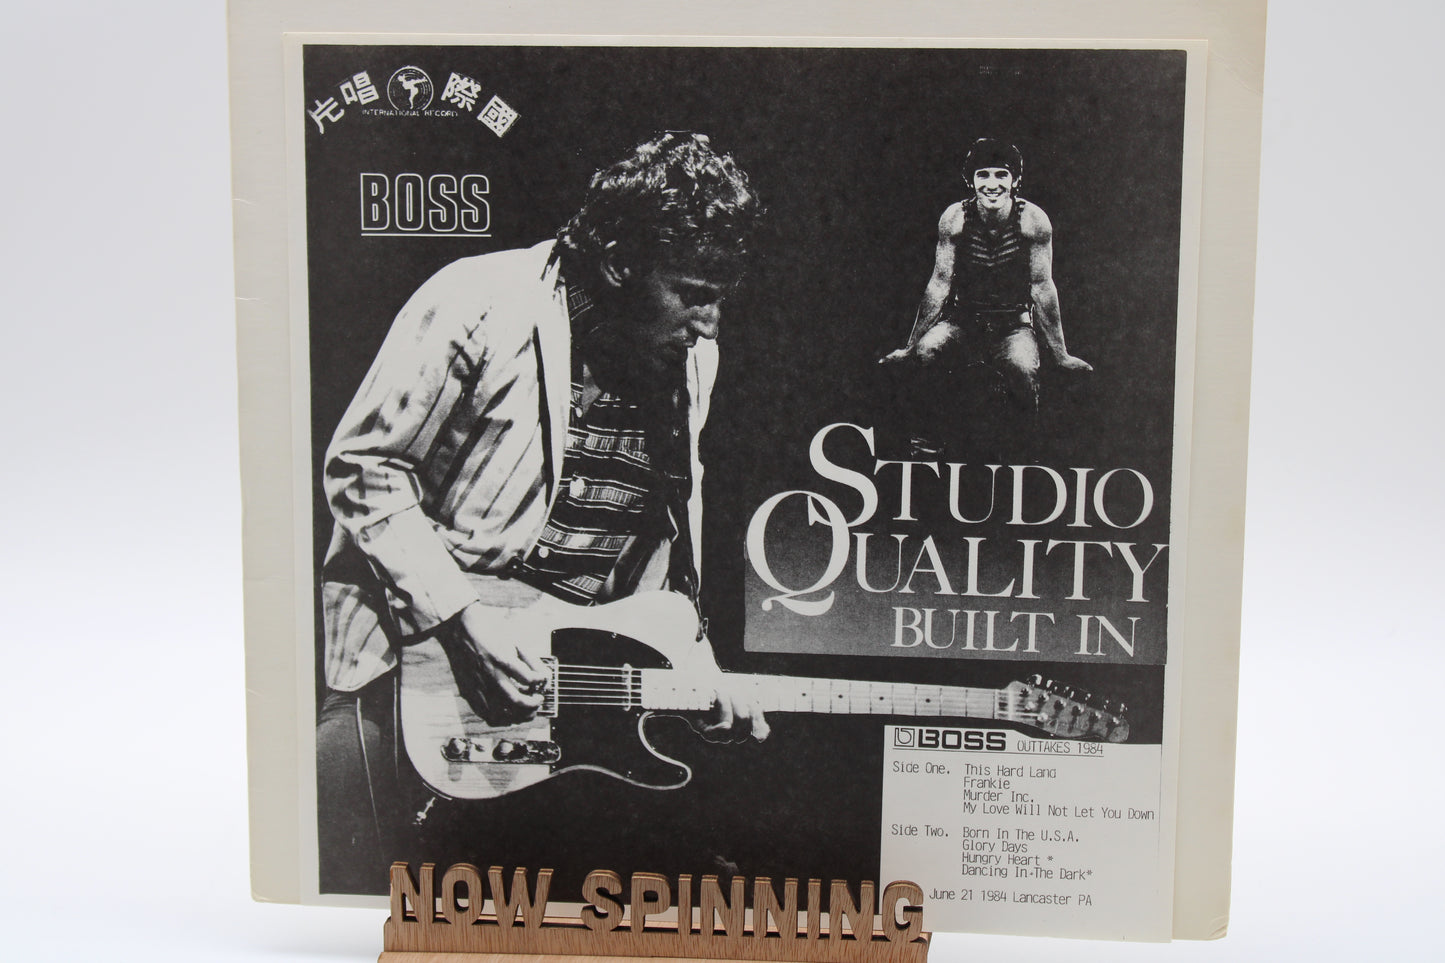 Bruce Springsteen - Studio Quality Built In - Outtakes & Live in Lancaster PA 1984 BLV